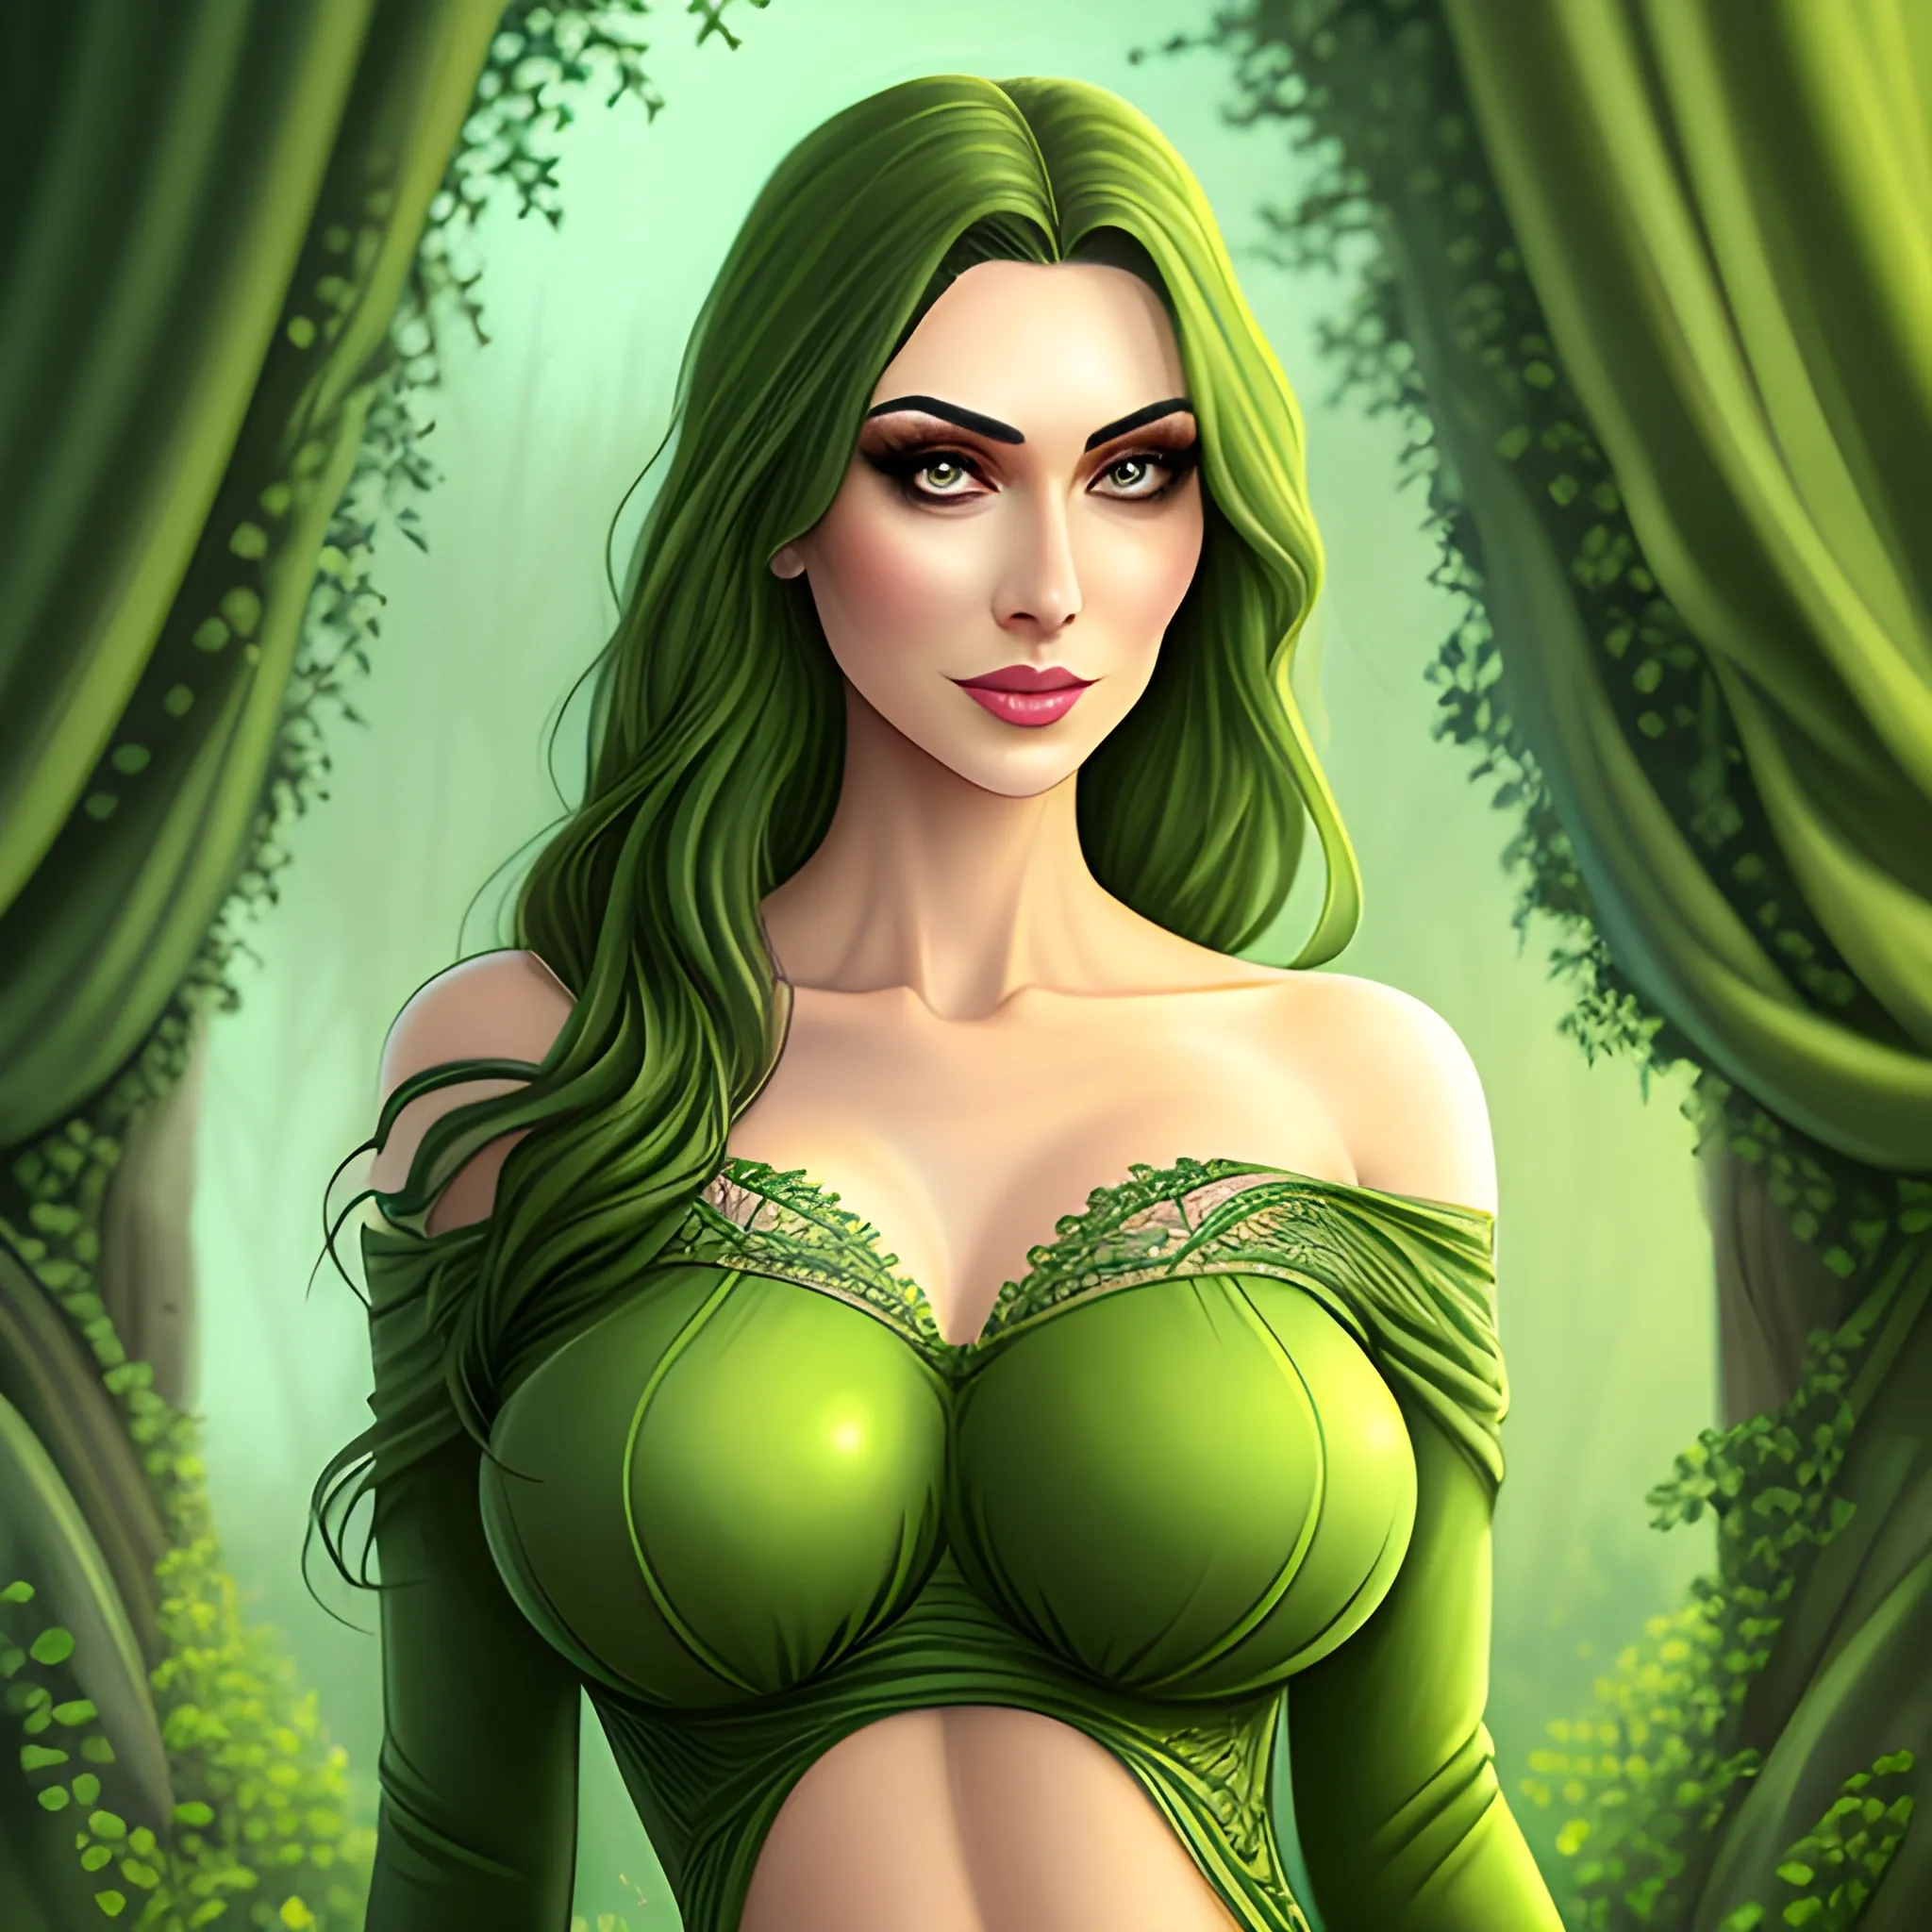 Beautiful girl with green eyes, high detail, green scene, hauntingly beautiful illustration, full body, braless

